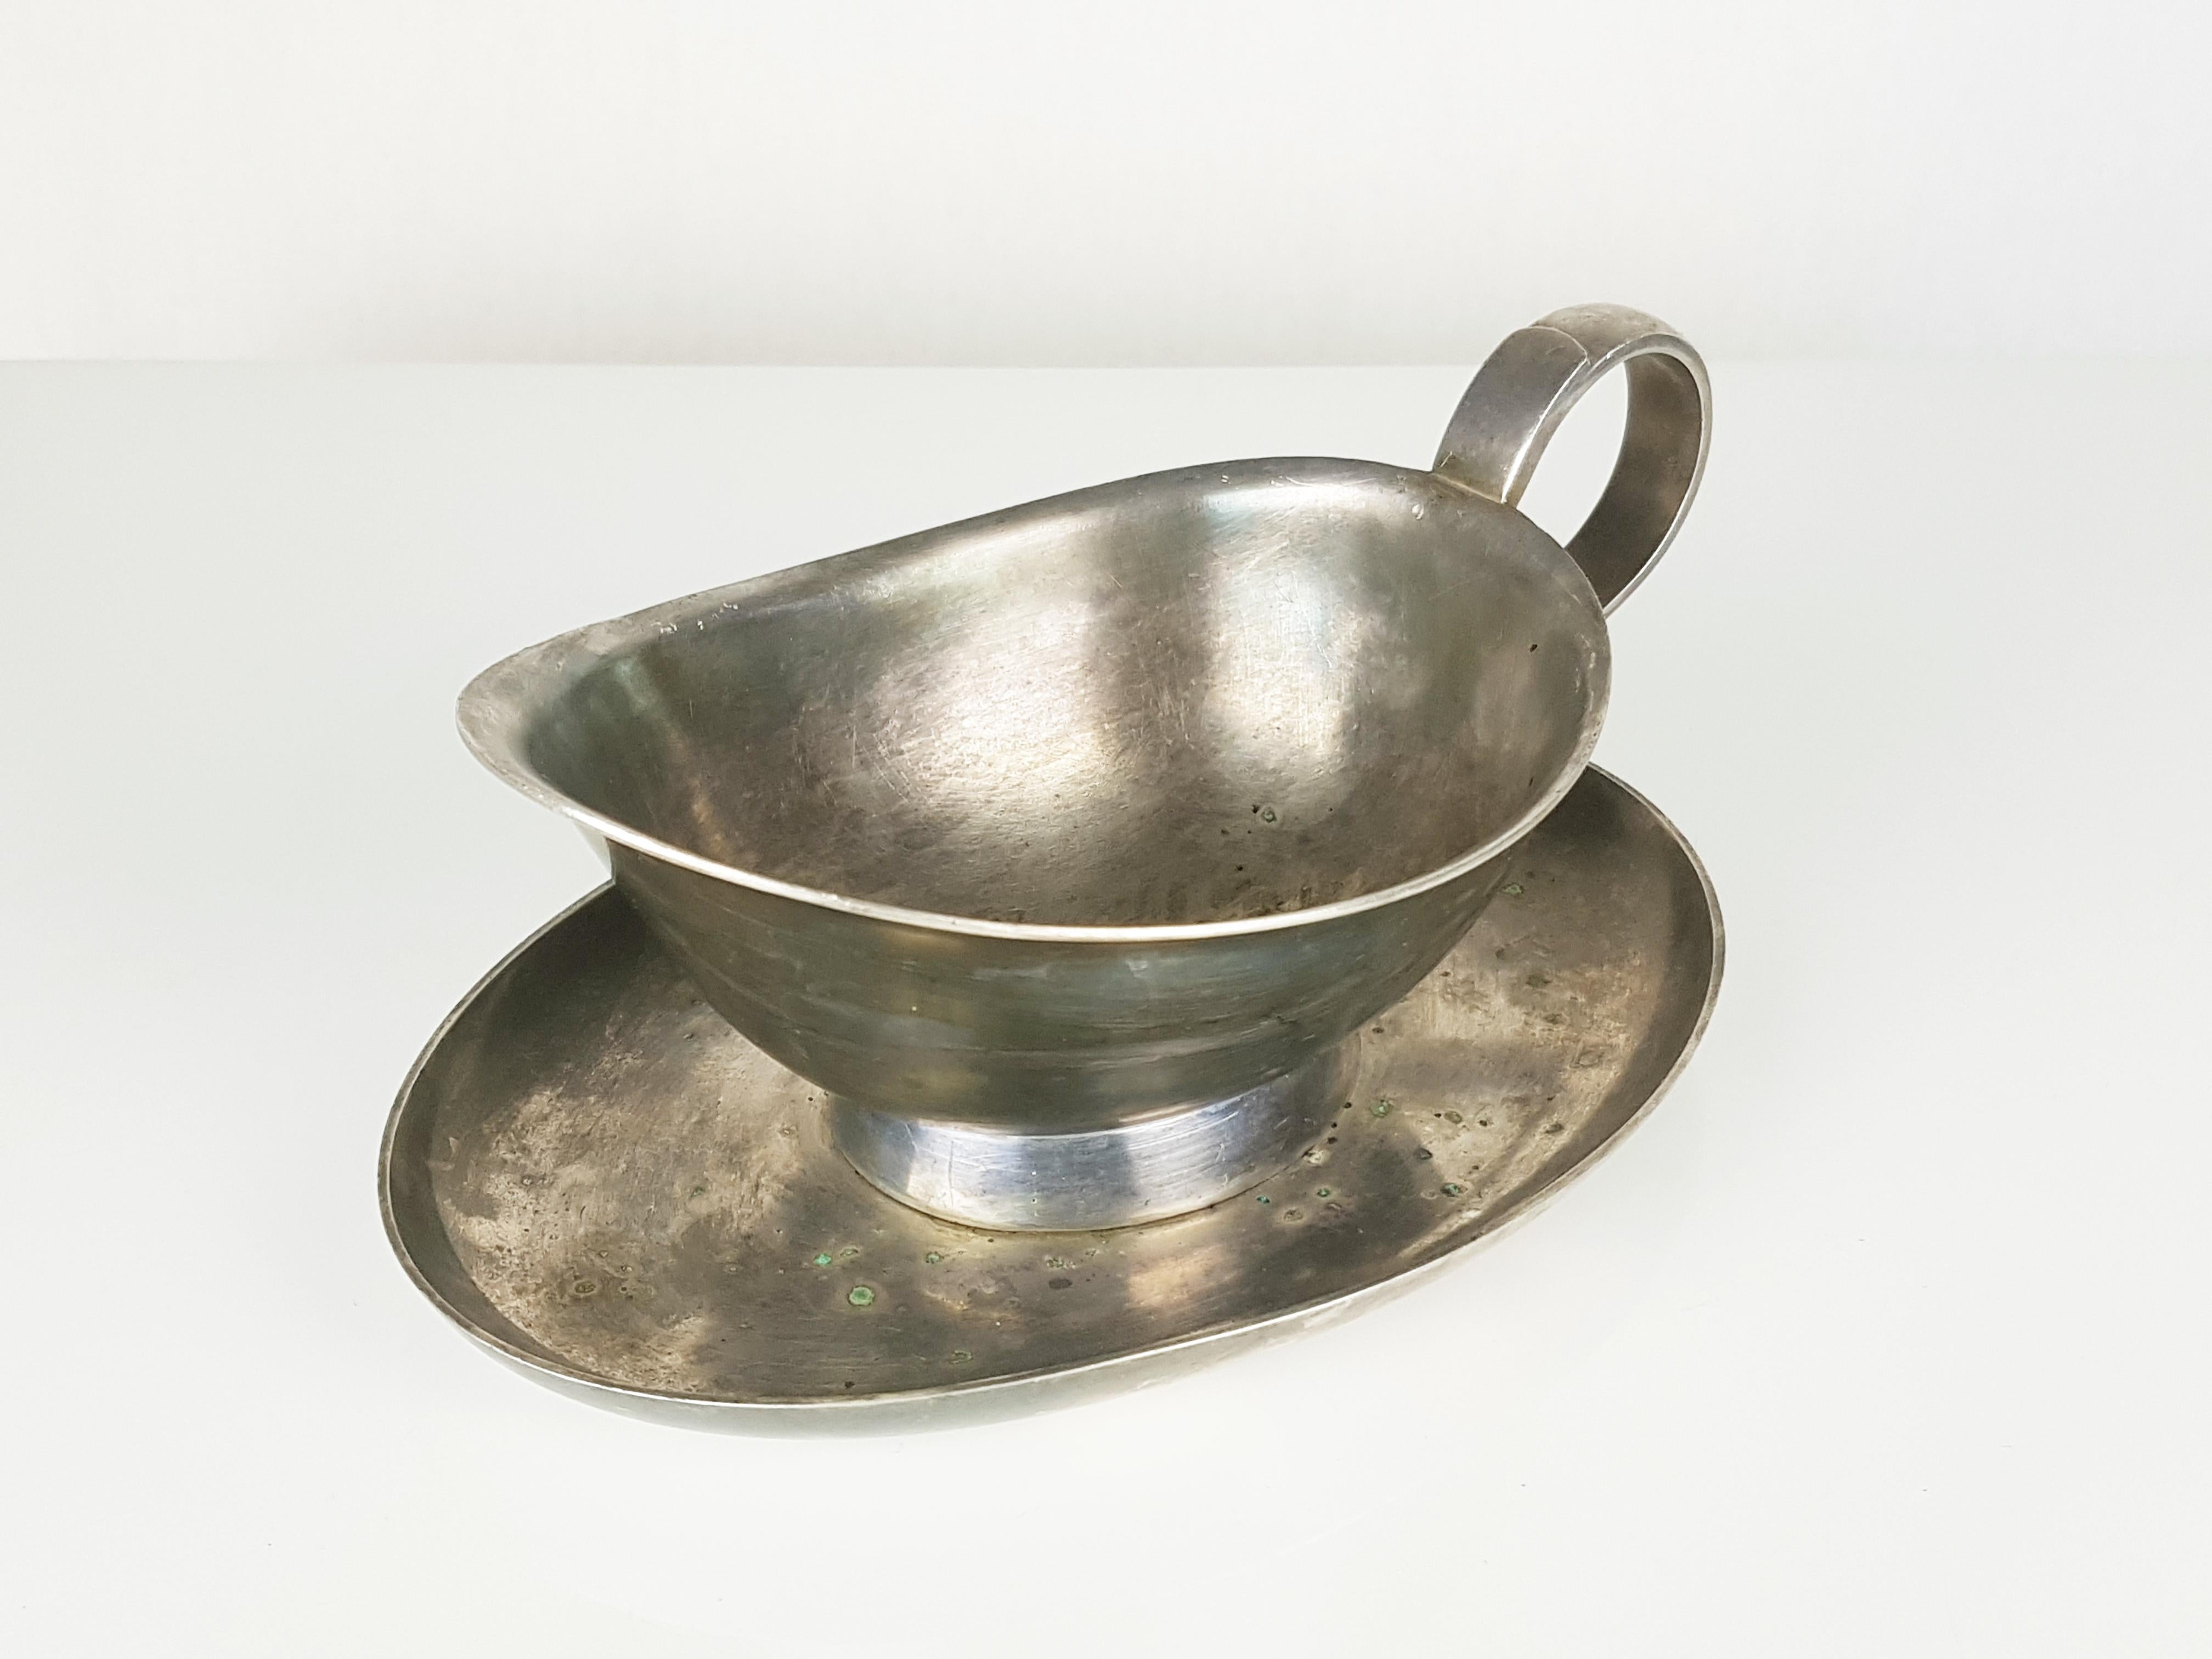 Art Deco Silver-Plated milk jug and gravy boat by Gio Ponti for Calderoni, 1930s For Sale